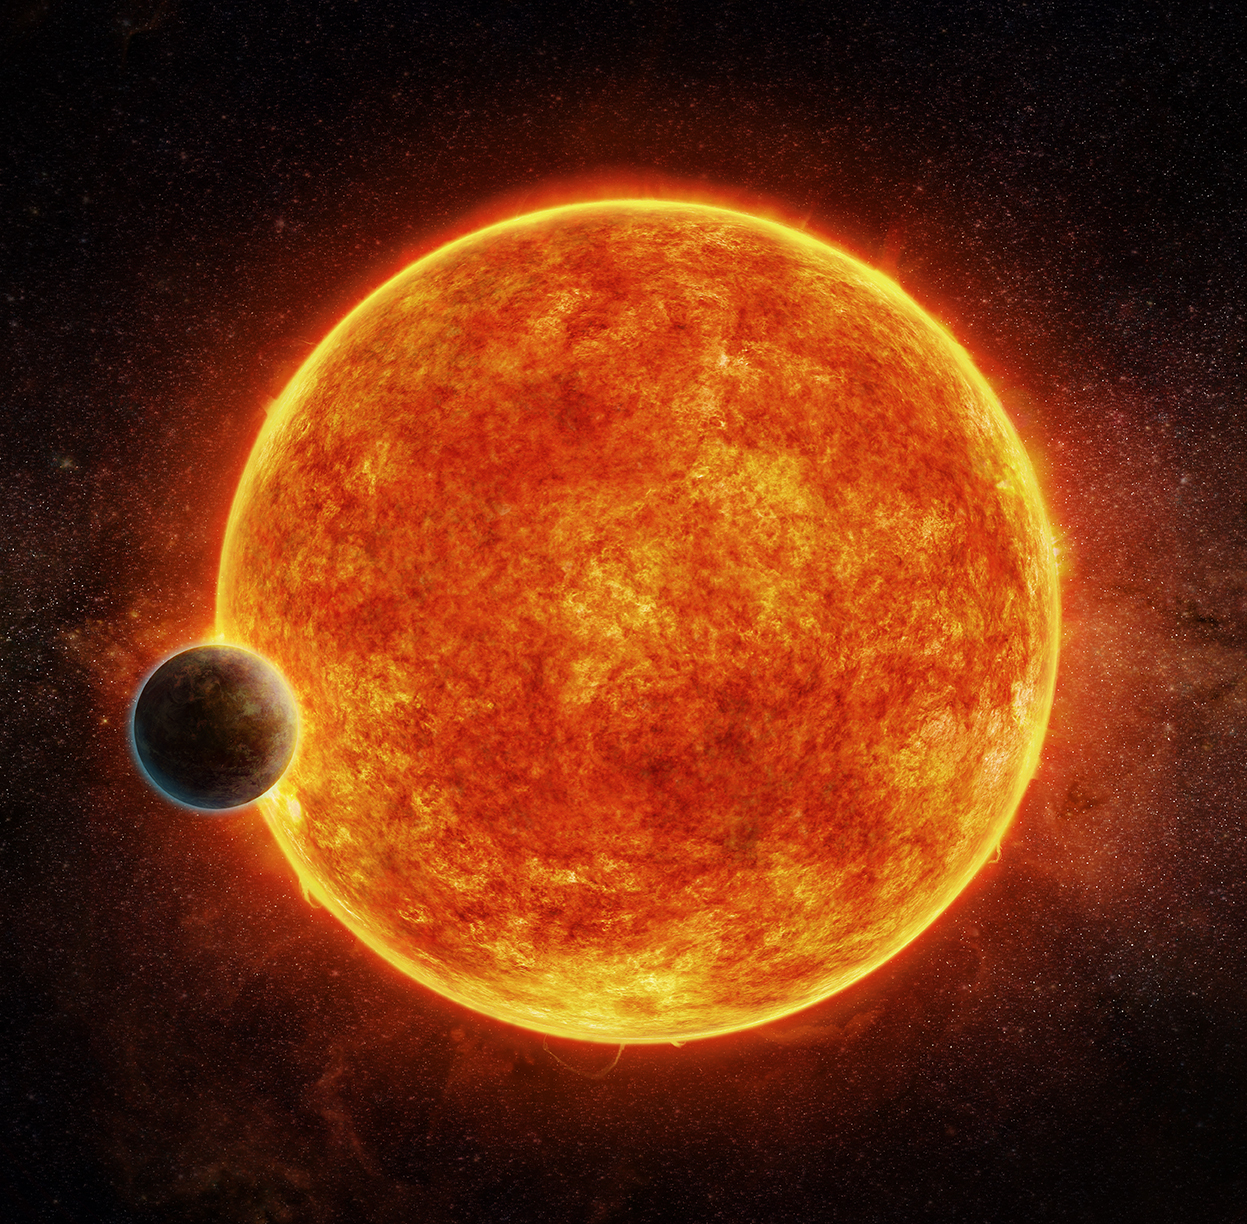 An artist's impression of the newly-discovered rocky exoplanet, LHS 1140b. This planet is located in the liquid water habitable zone surrounding its host star, a small, faint red star named LHS 1140. The planet weighs about 6.6 times the mass of Earth and is shown passing in front of LHS 1140. Depicted in blue is the atmosphere the planet may have retained.